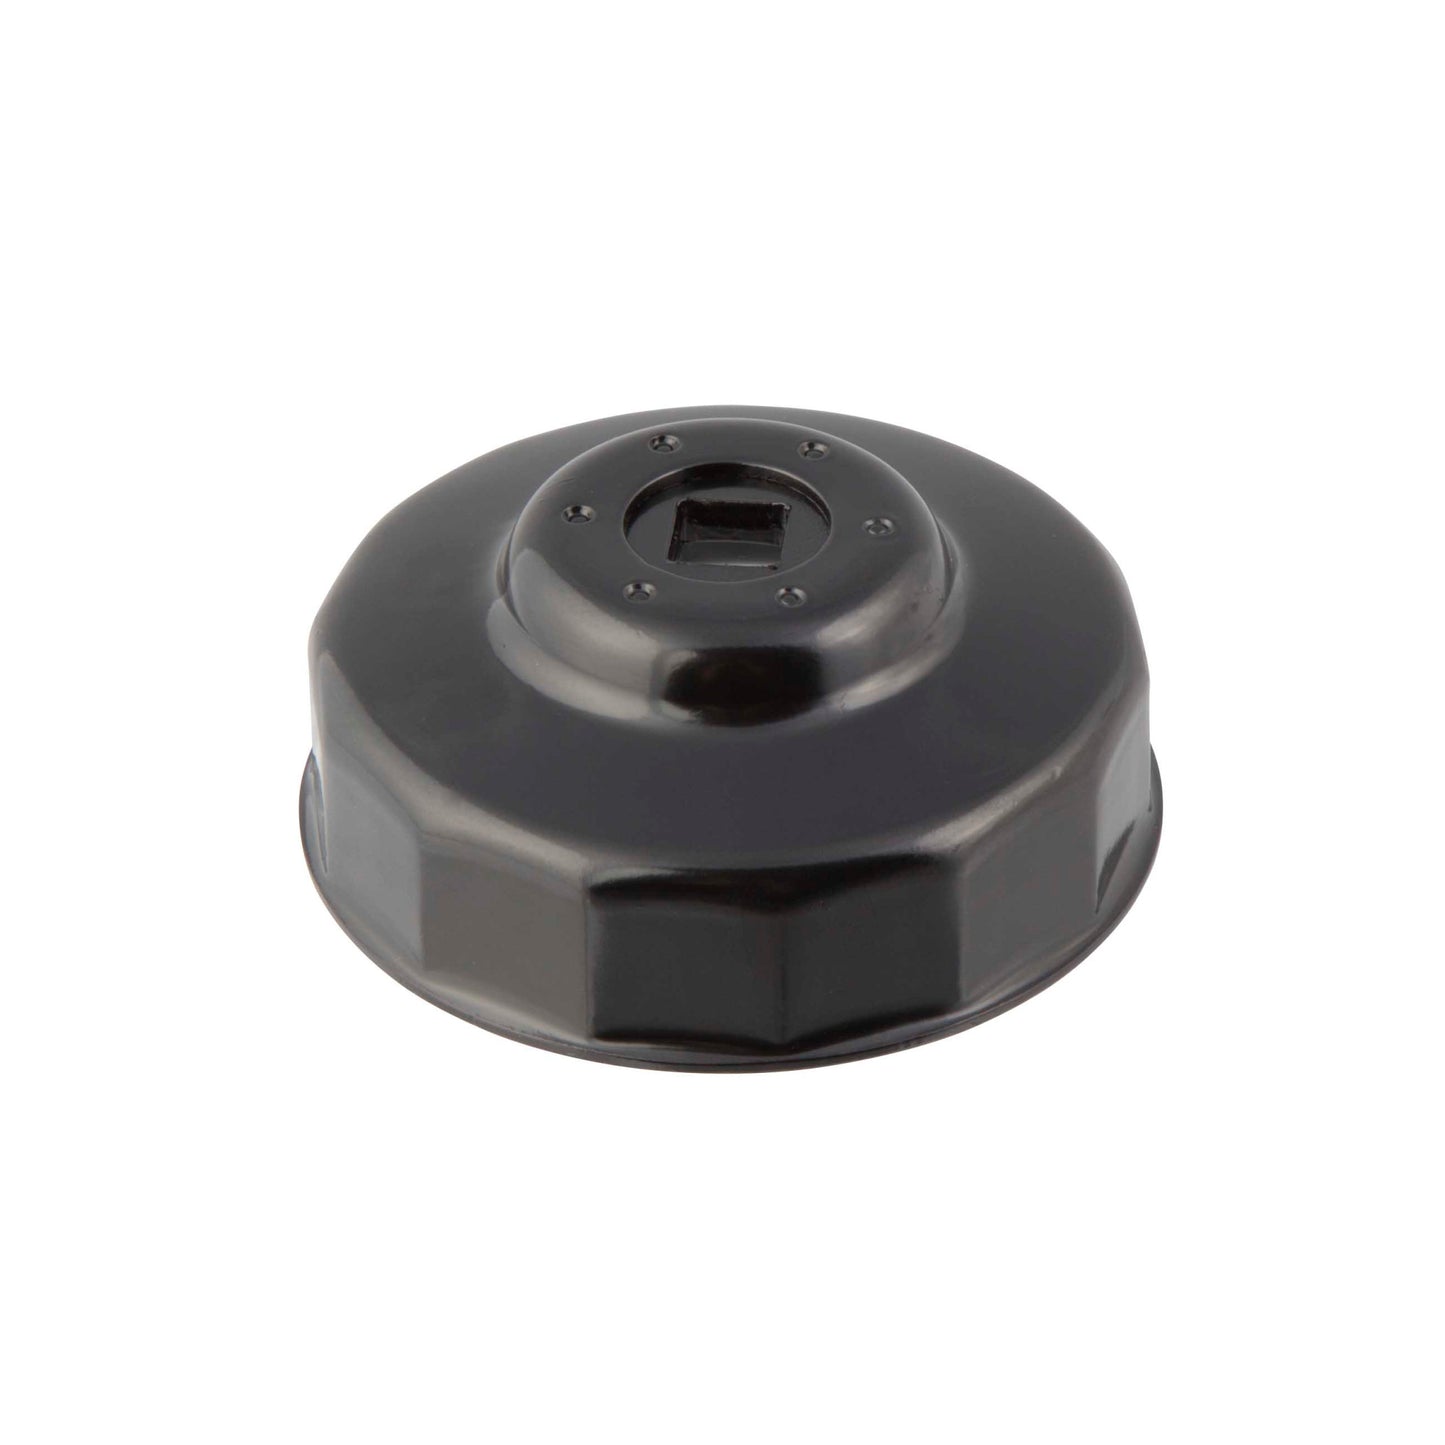 Oil Filter Cap Wrench 74mm x 14 Flute